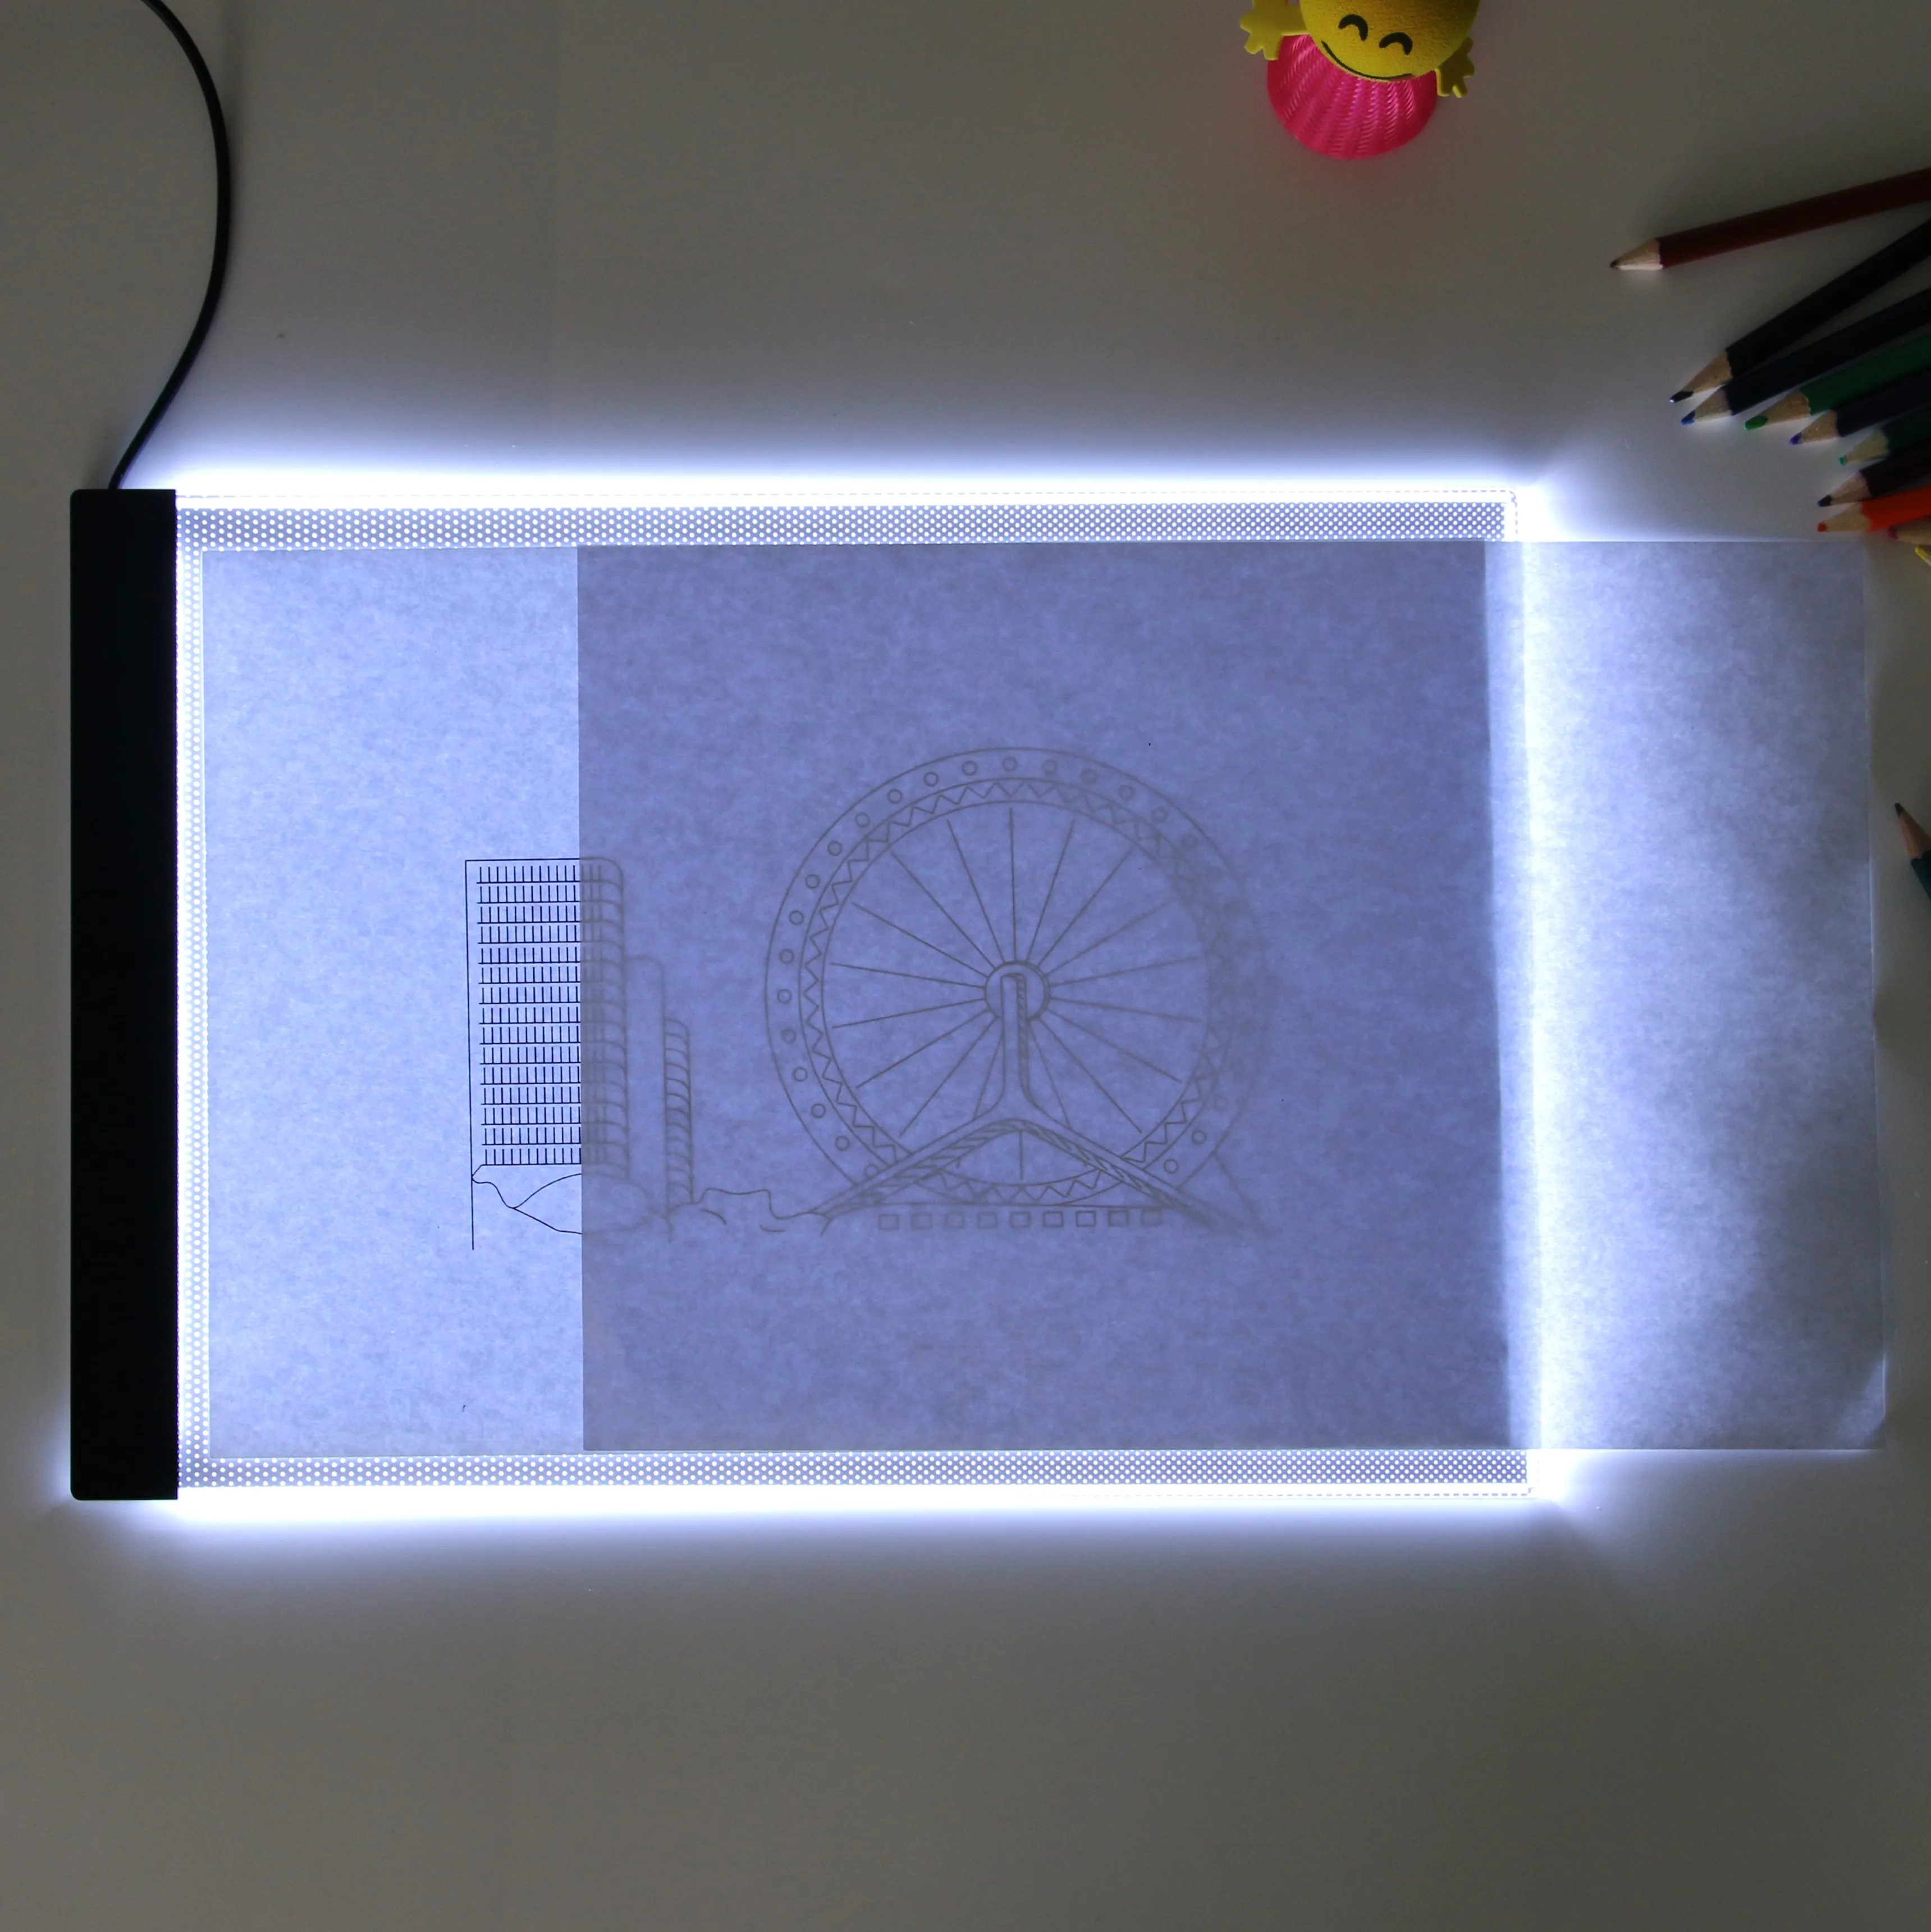 
A4 LED Light Tracing Pad Alvin Artist Stencil Board Tattoo LED Drawing Table Slide Light Box For Architects Adjustable Dimming 